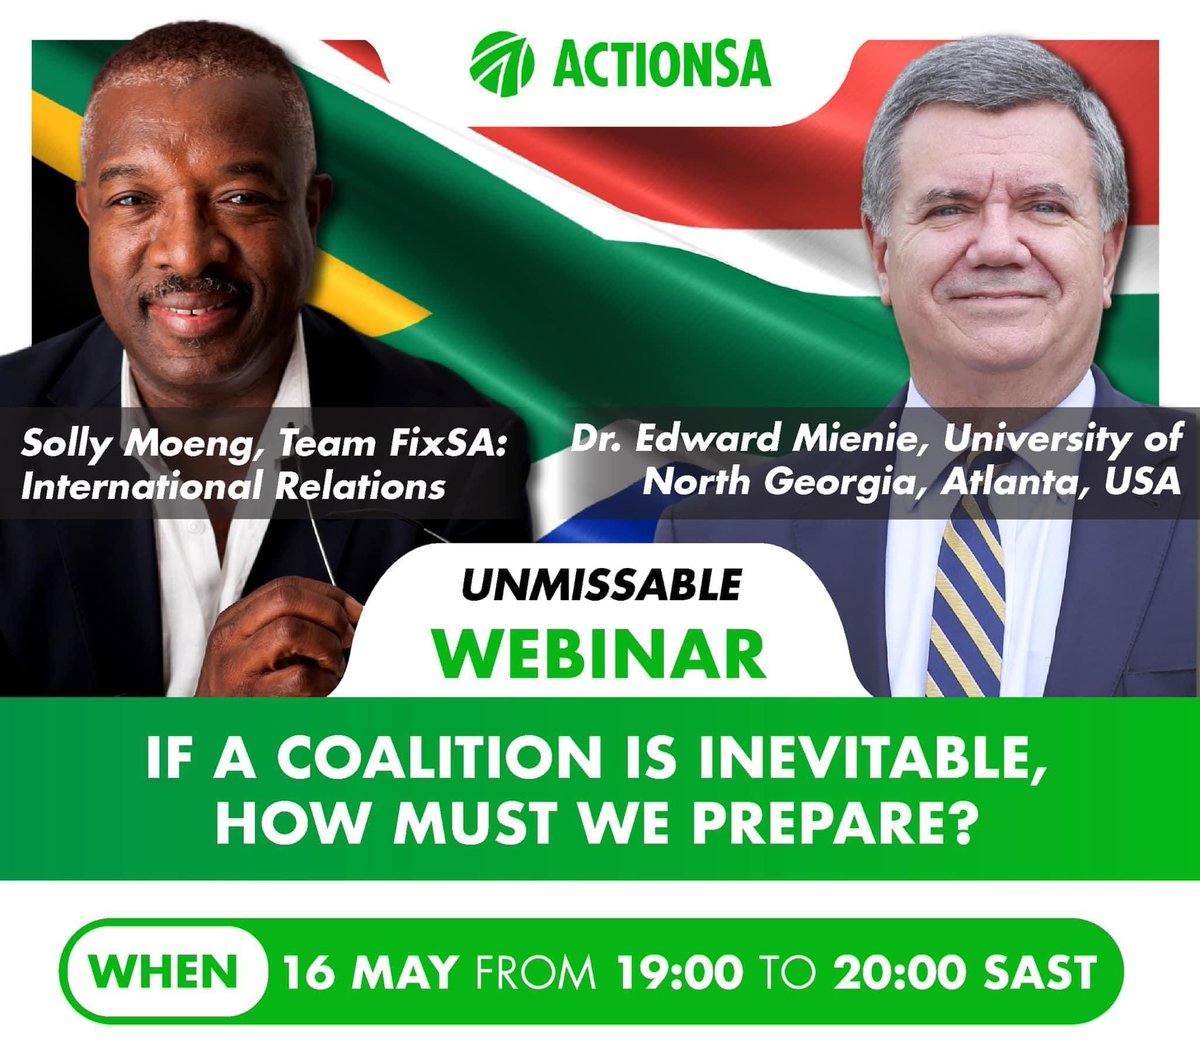 Join our Team FixSA member for International Relations, @Solitoliquido, in conversation with Dr. Edward Mienie on the topic of coalitions post the May 29 Election. 📺 Join us on YouTube: youtube.com/watch?v=voIHDR…